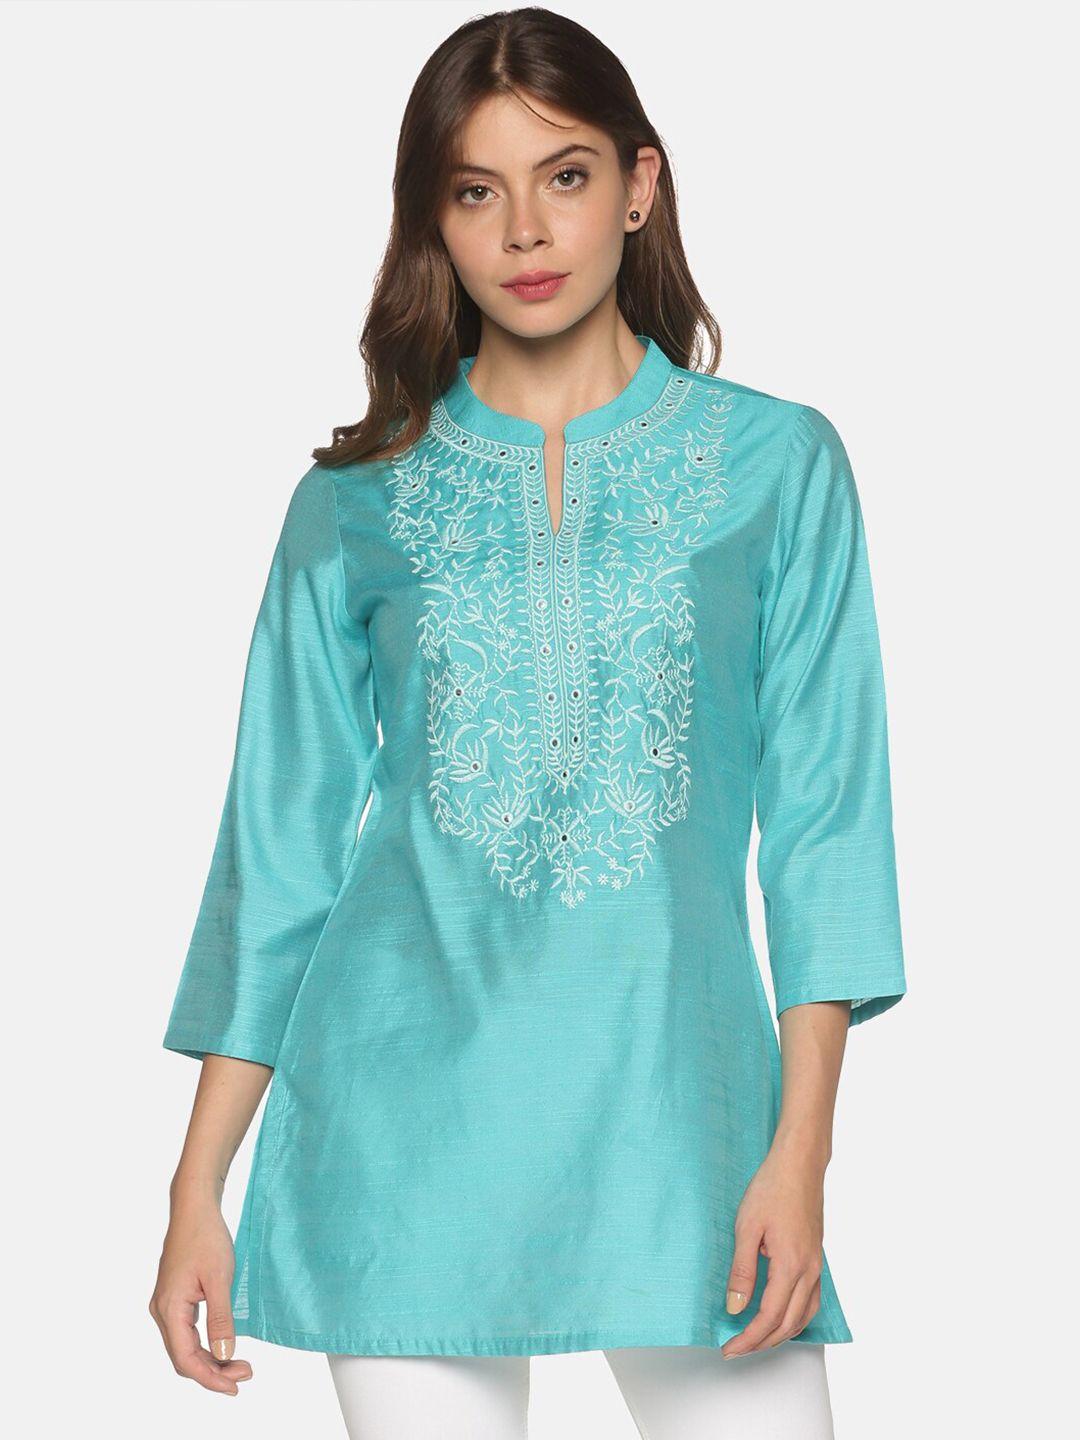 saffron-threads-women-turquoise-blue-embroidered-tunic